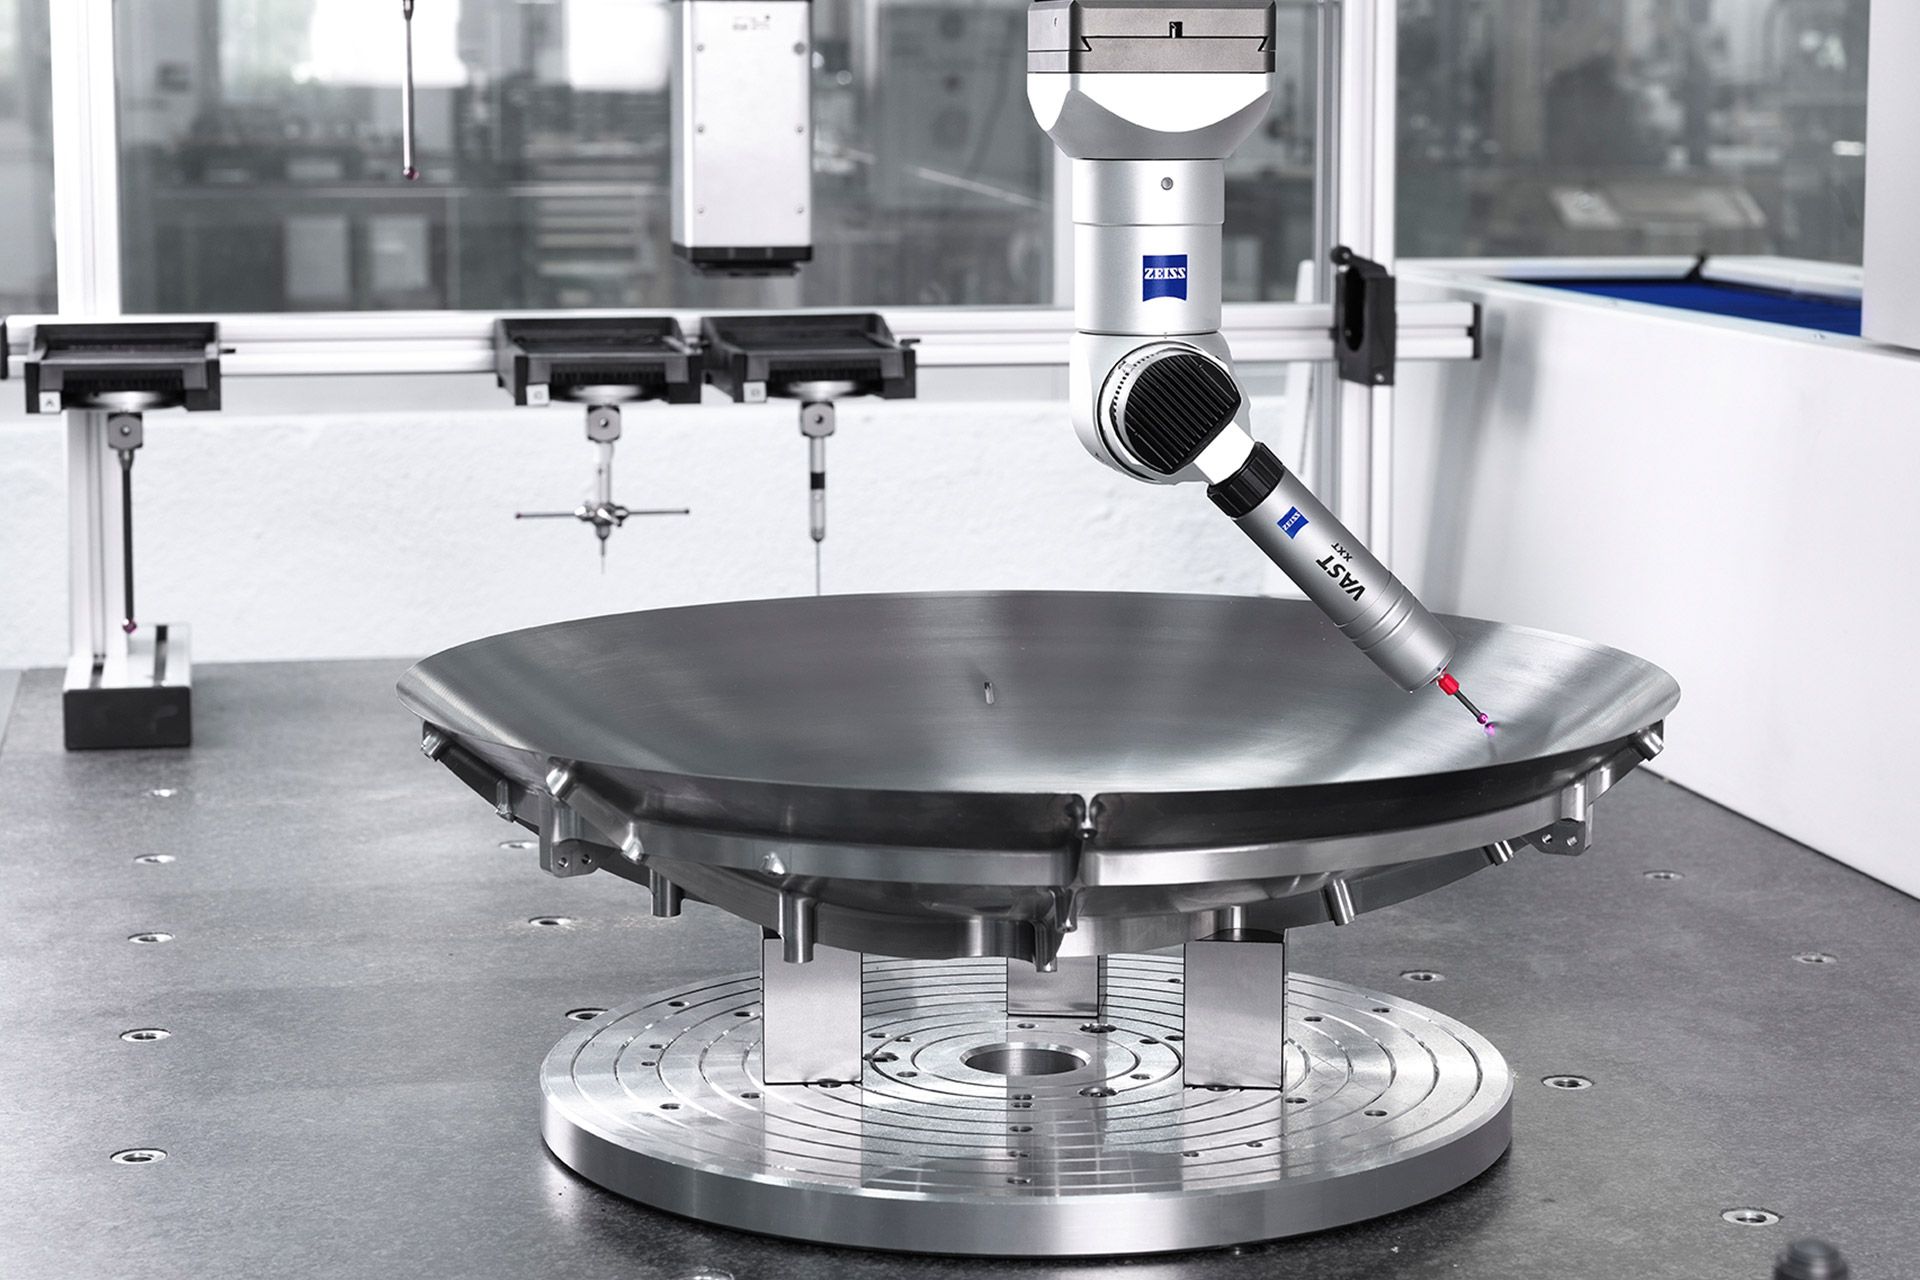 Goimek stands out as a specialist in precision and large-scale machining services, catering to industries for high value-added parts with exacting demands